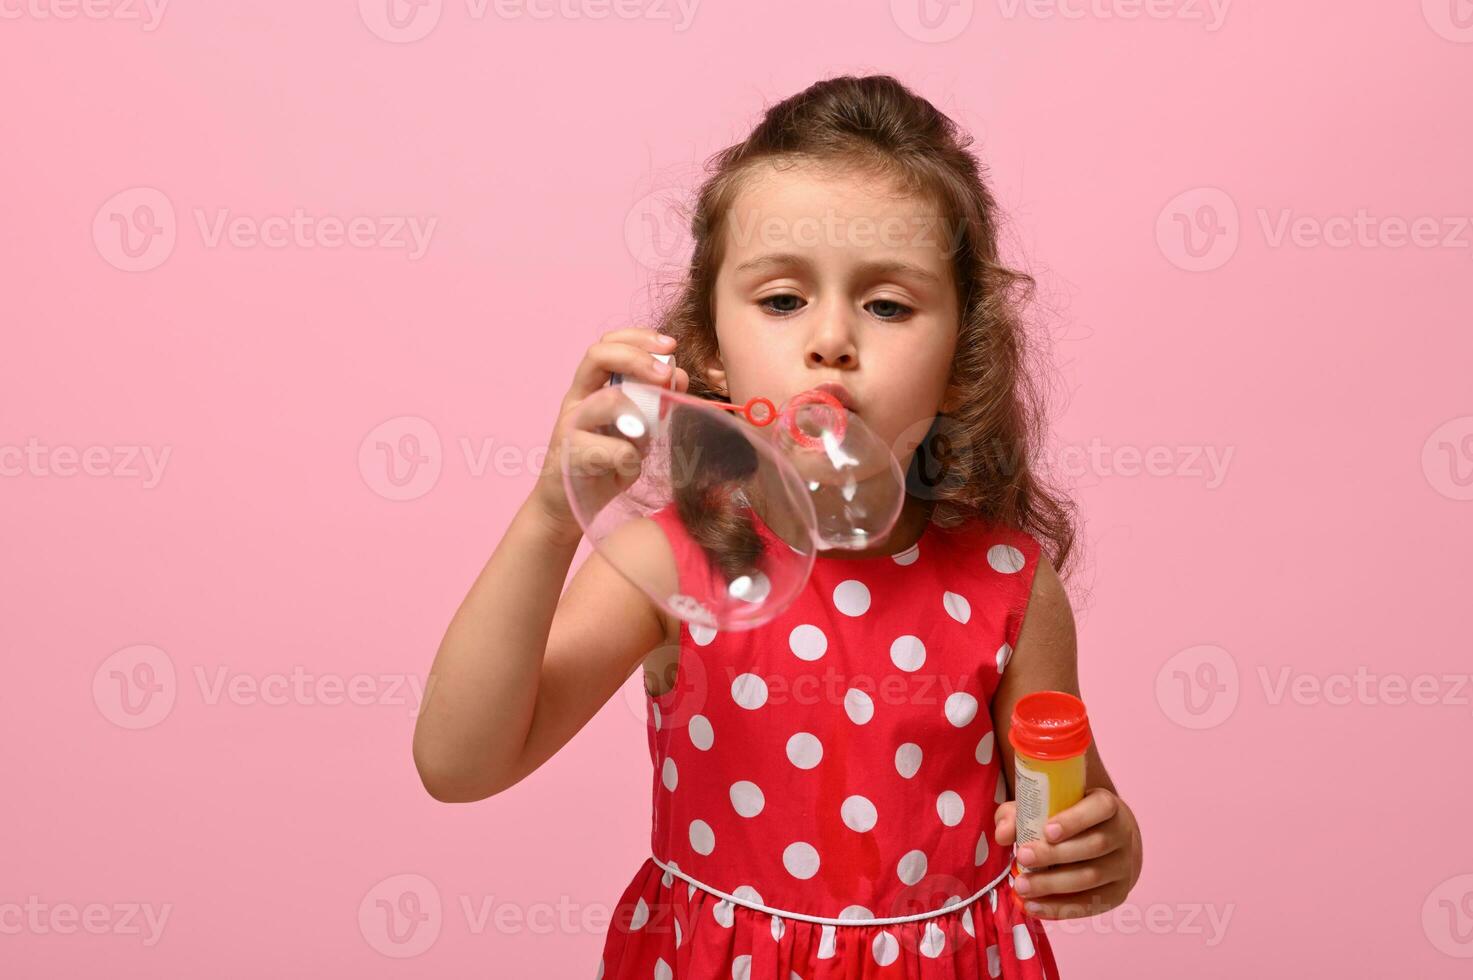 Cheerful happy Birthday girl in pink polka dots dress blowing soap bubbles, isolated over pink background with copy space. Gorgeous child playing with soap bubbles. Summer children leisures concept photo